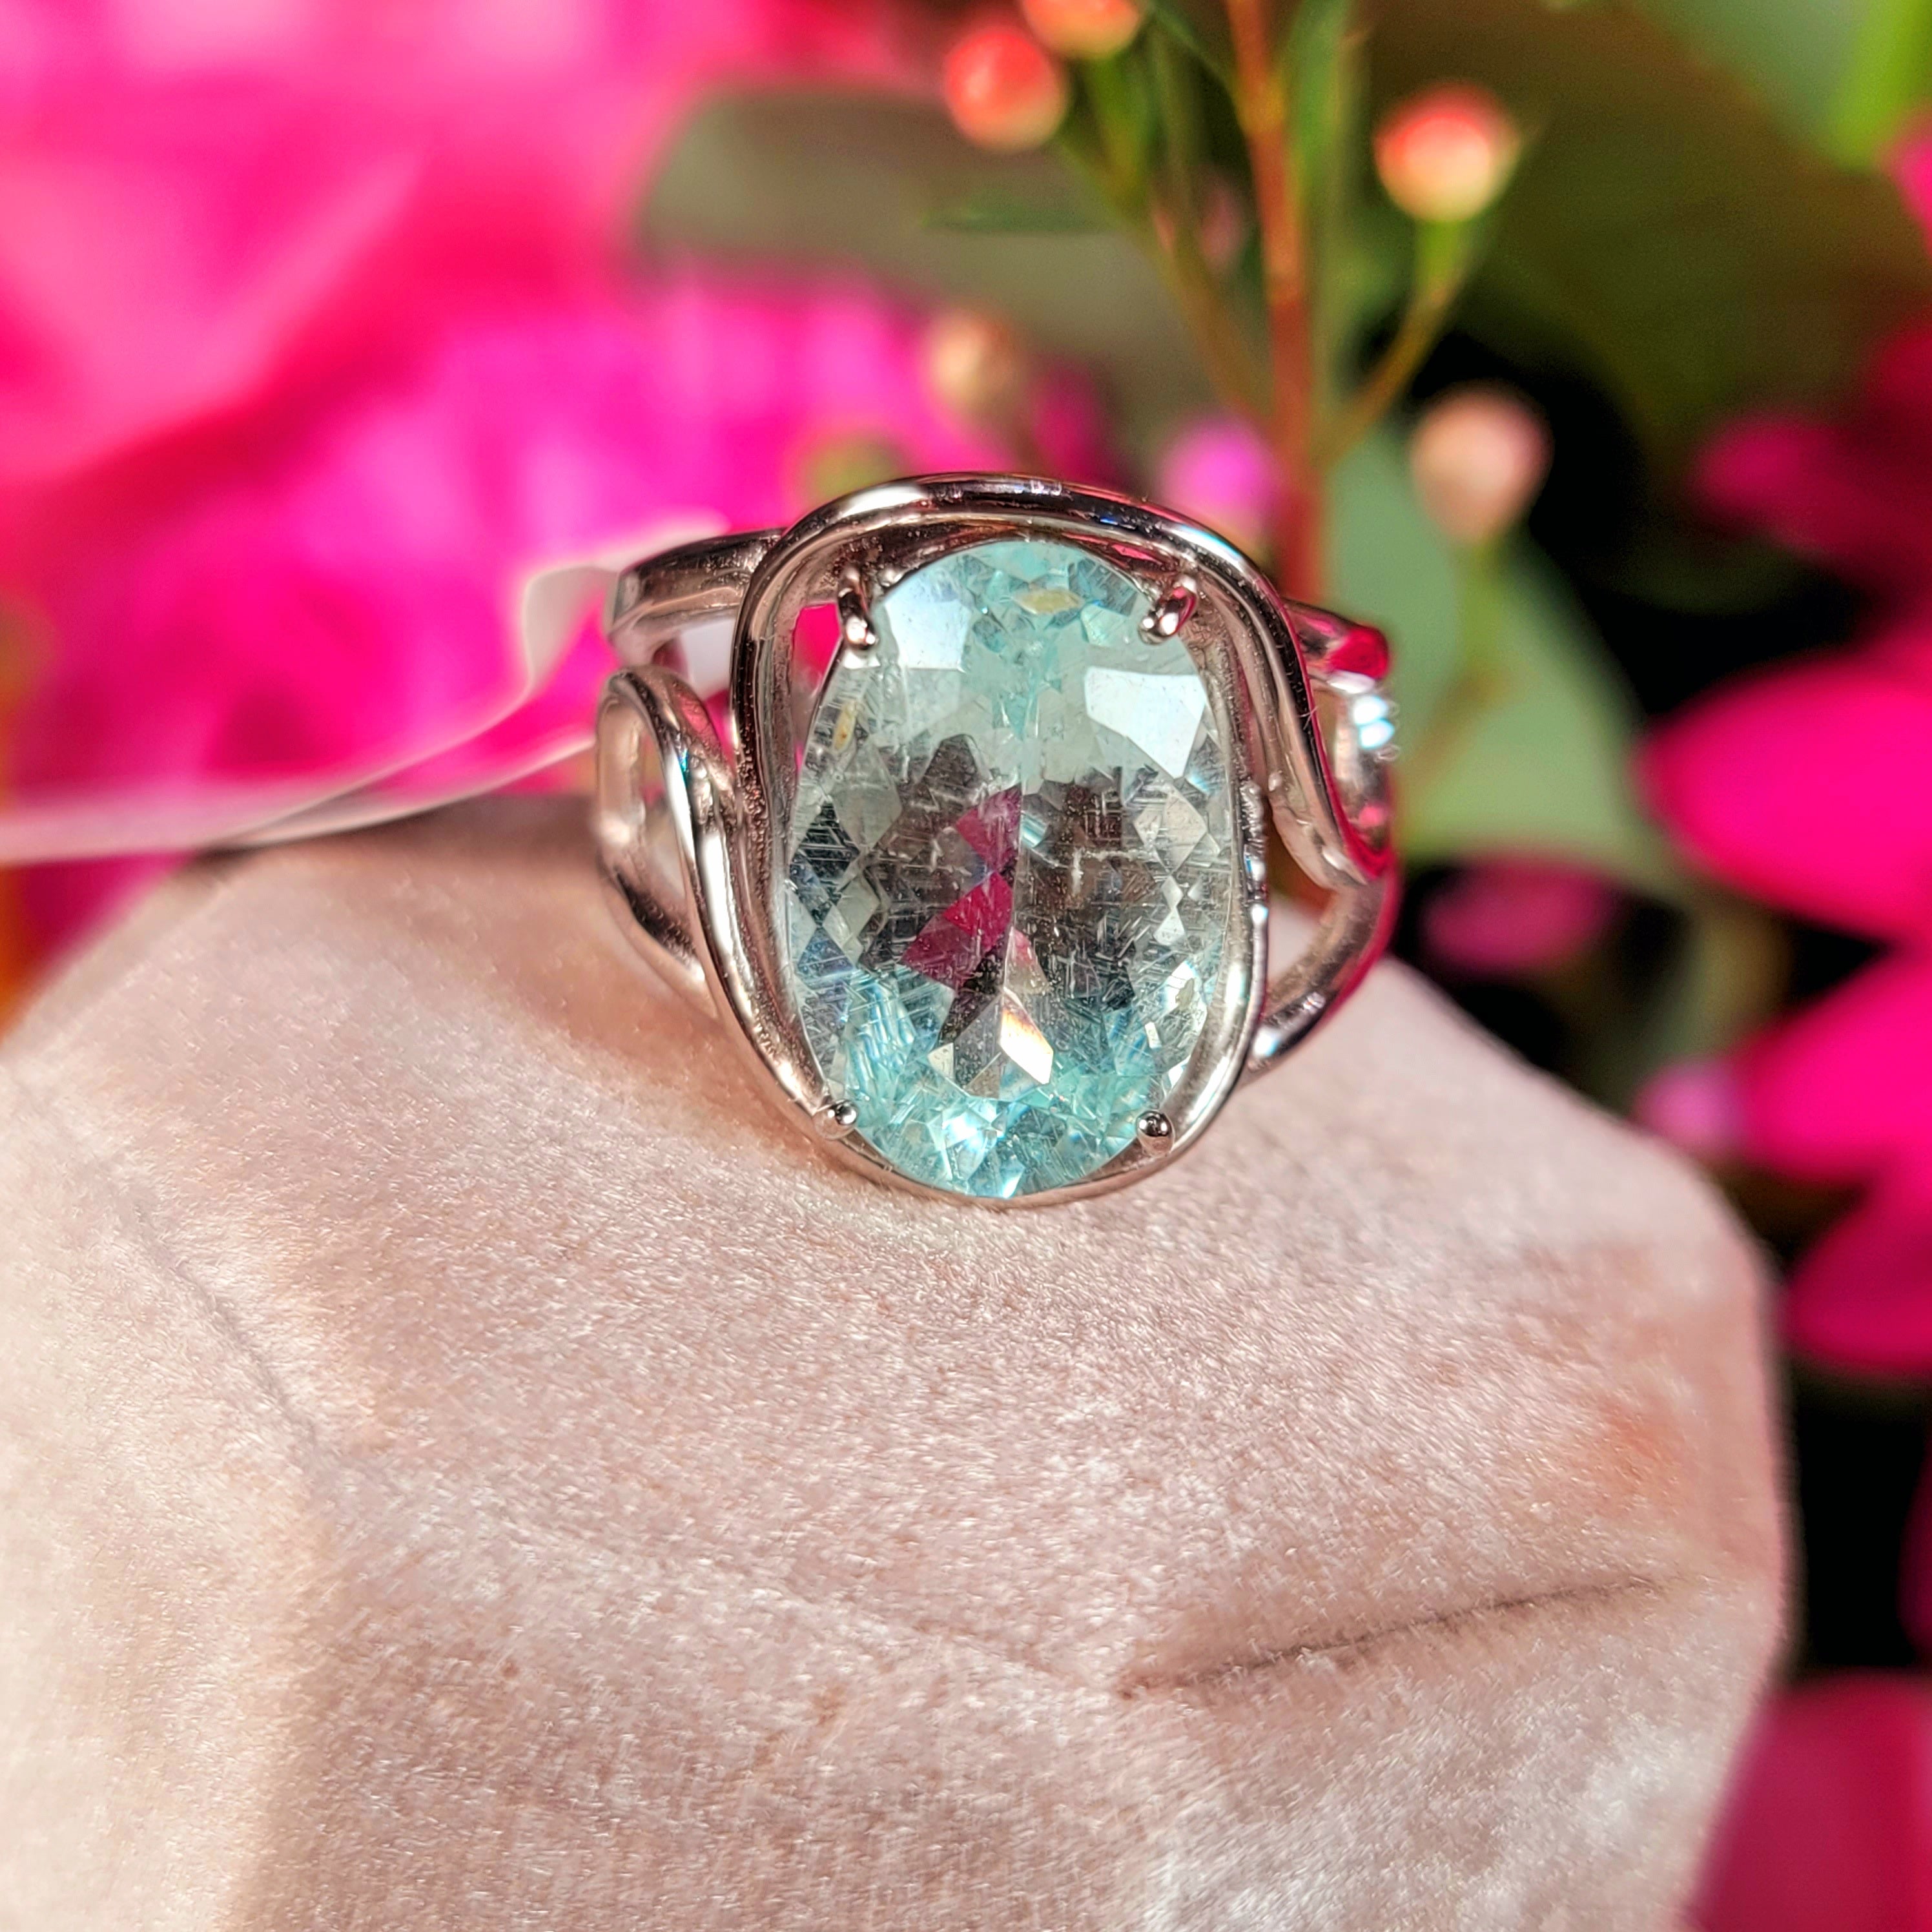 Aquamarine & Rutile Finger Cuff Adjustable Ring .925 Silver for Improved Communication and Peace